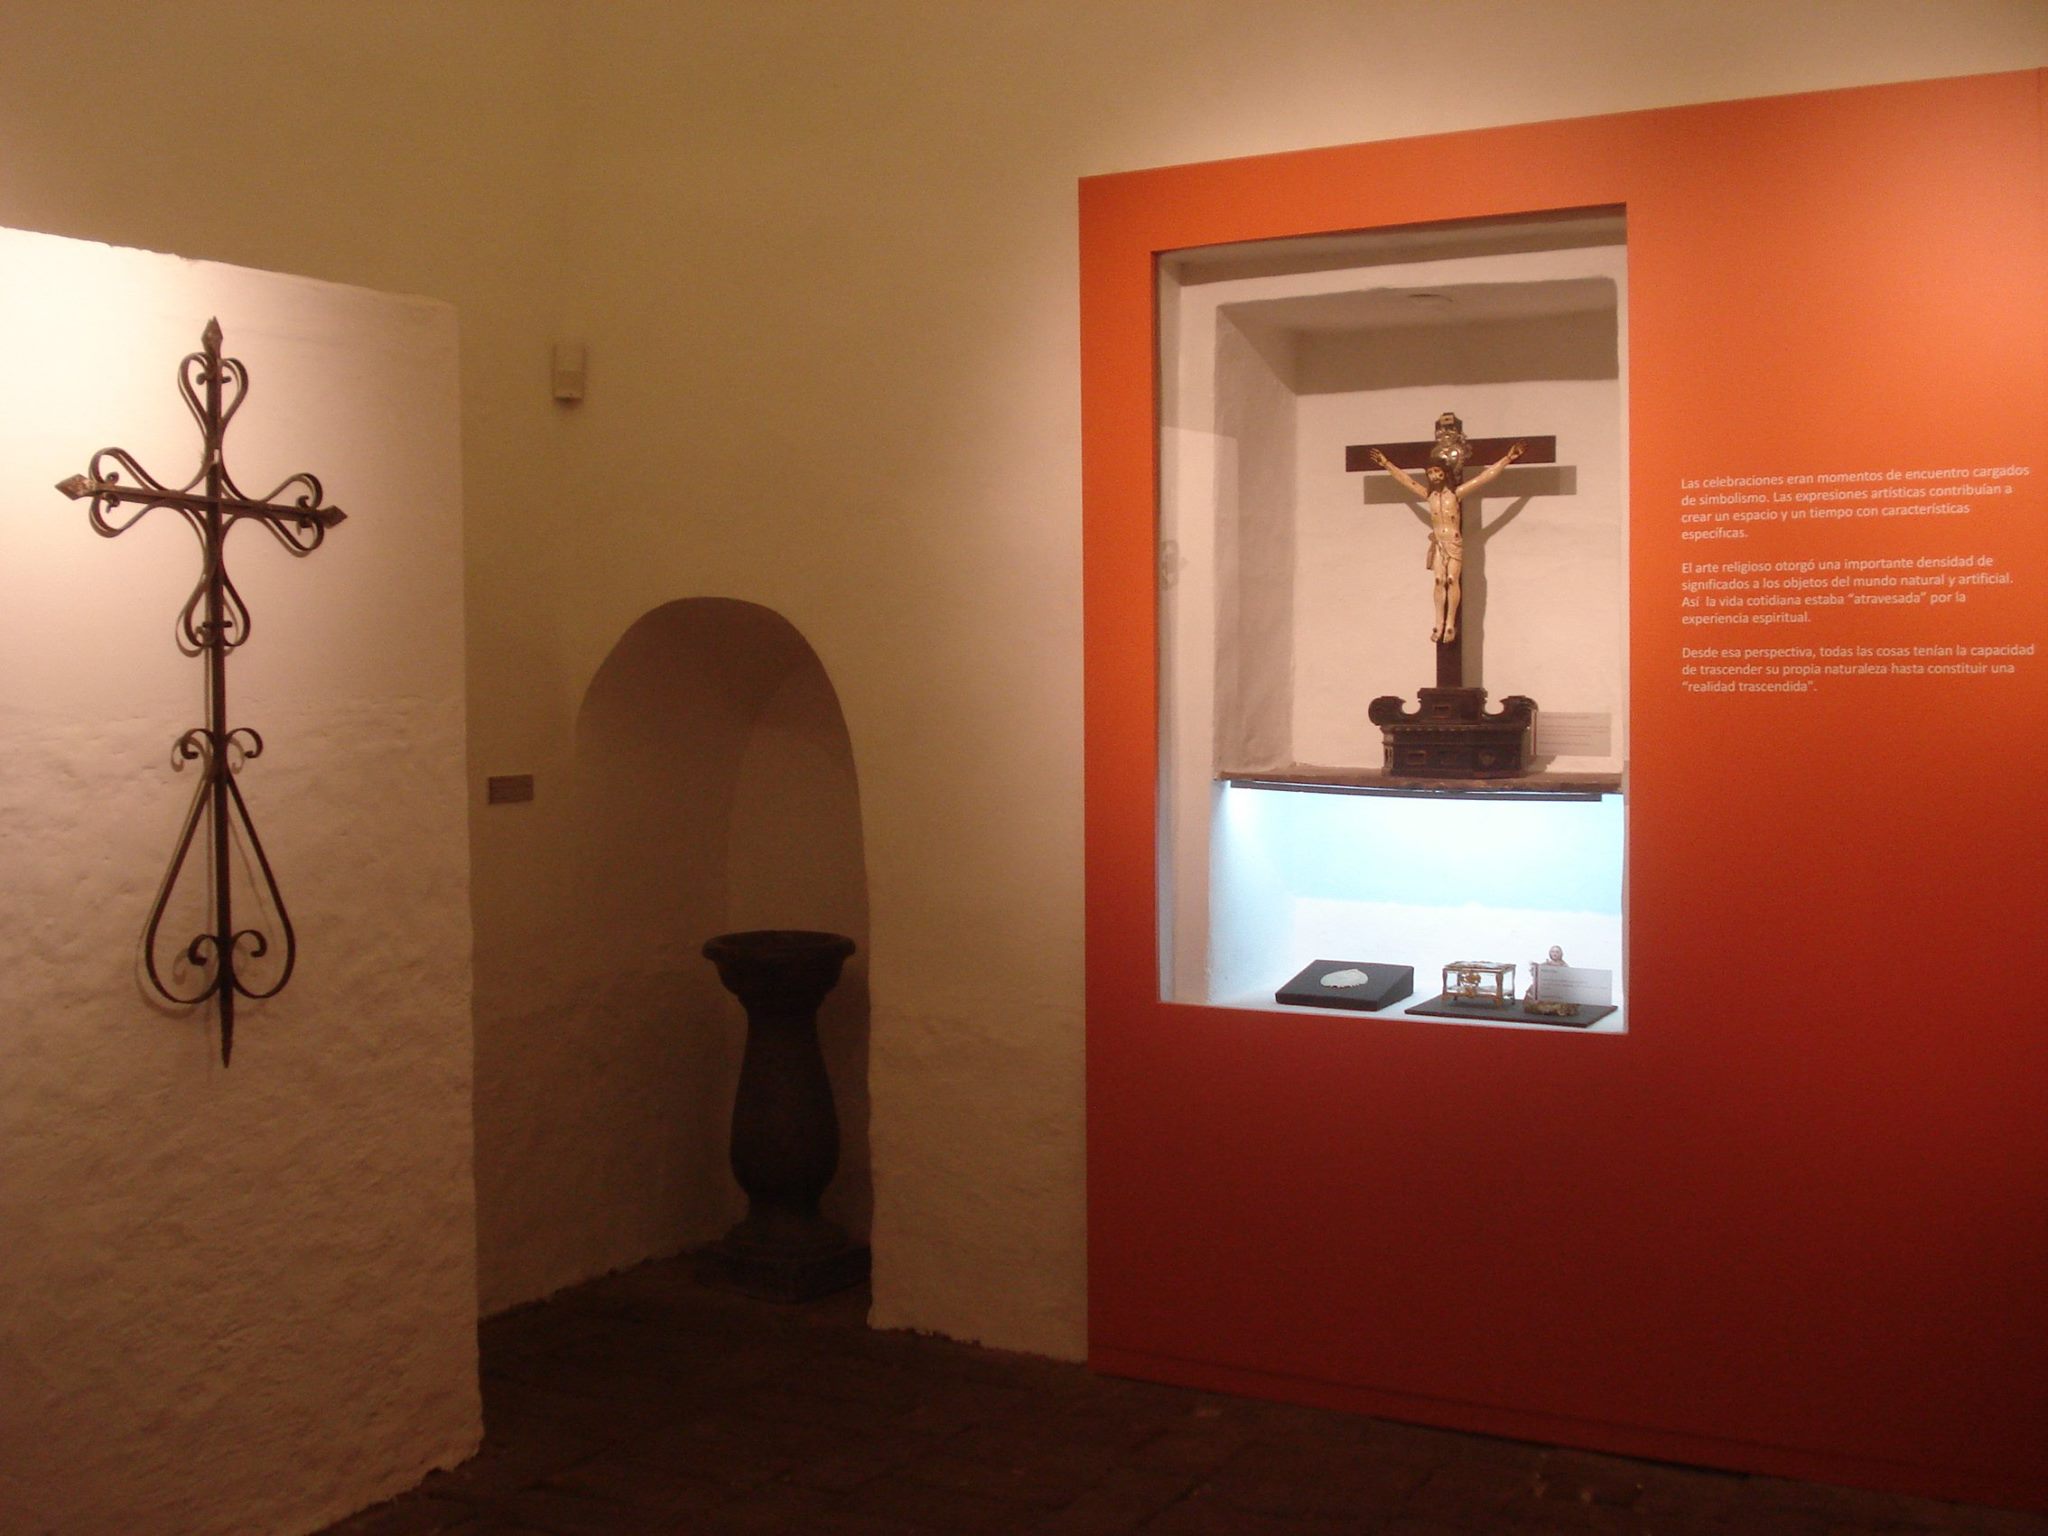 Juan de Tejeda Religious Art Museum. Hall 4 of the museum. To the left a cemetery cross with African symbols.. Photo: Juan de Tejeda Religious Art Museum